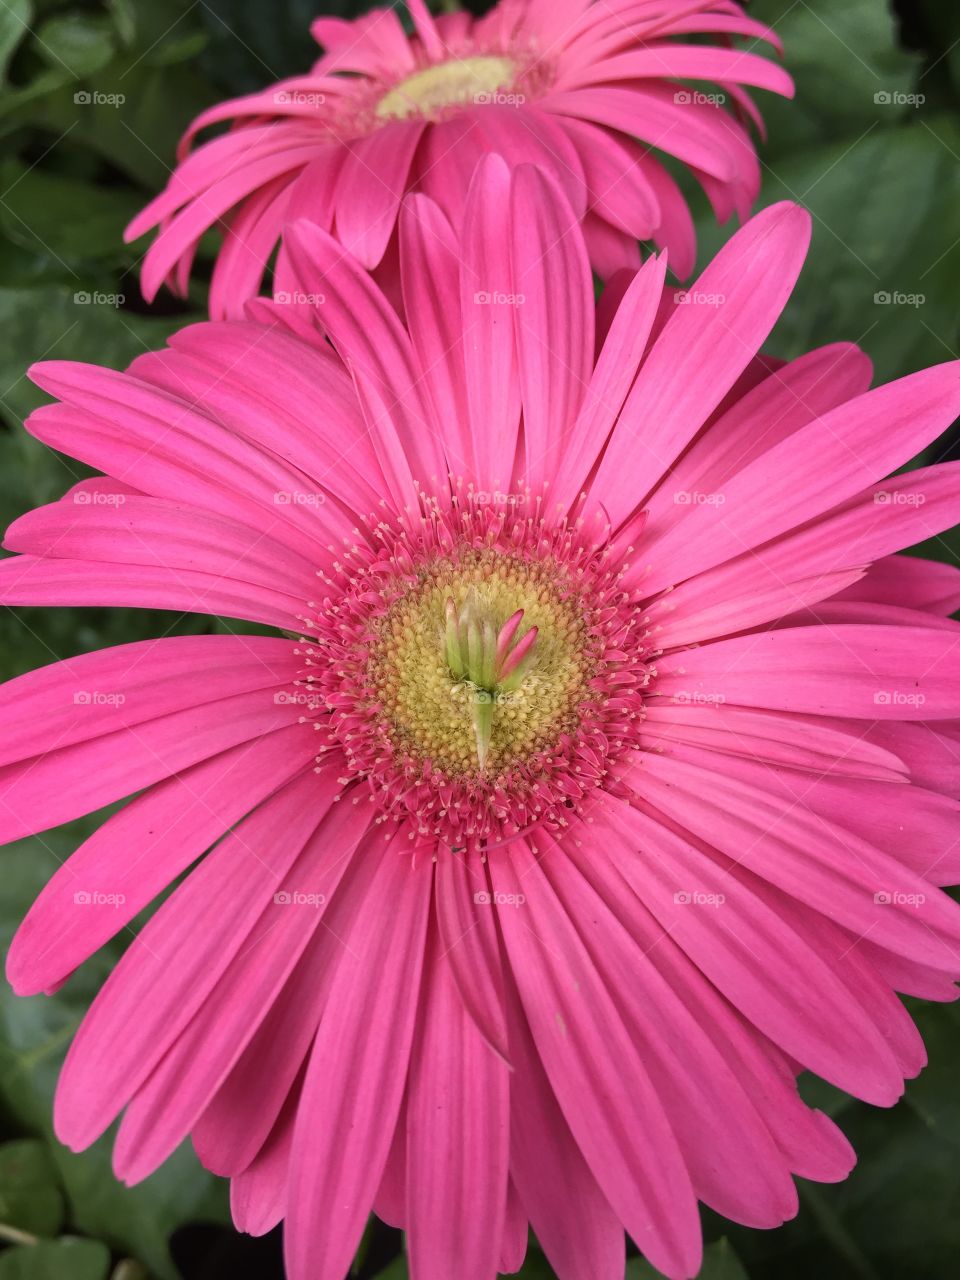 Directly above view of pink gerbera daisy